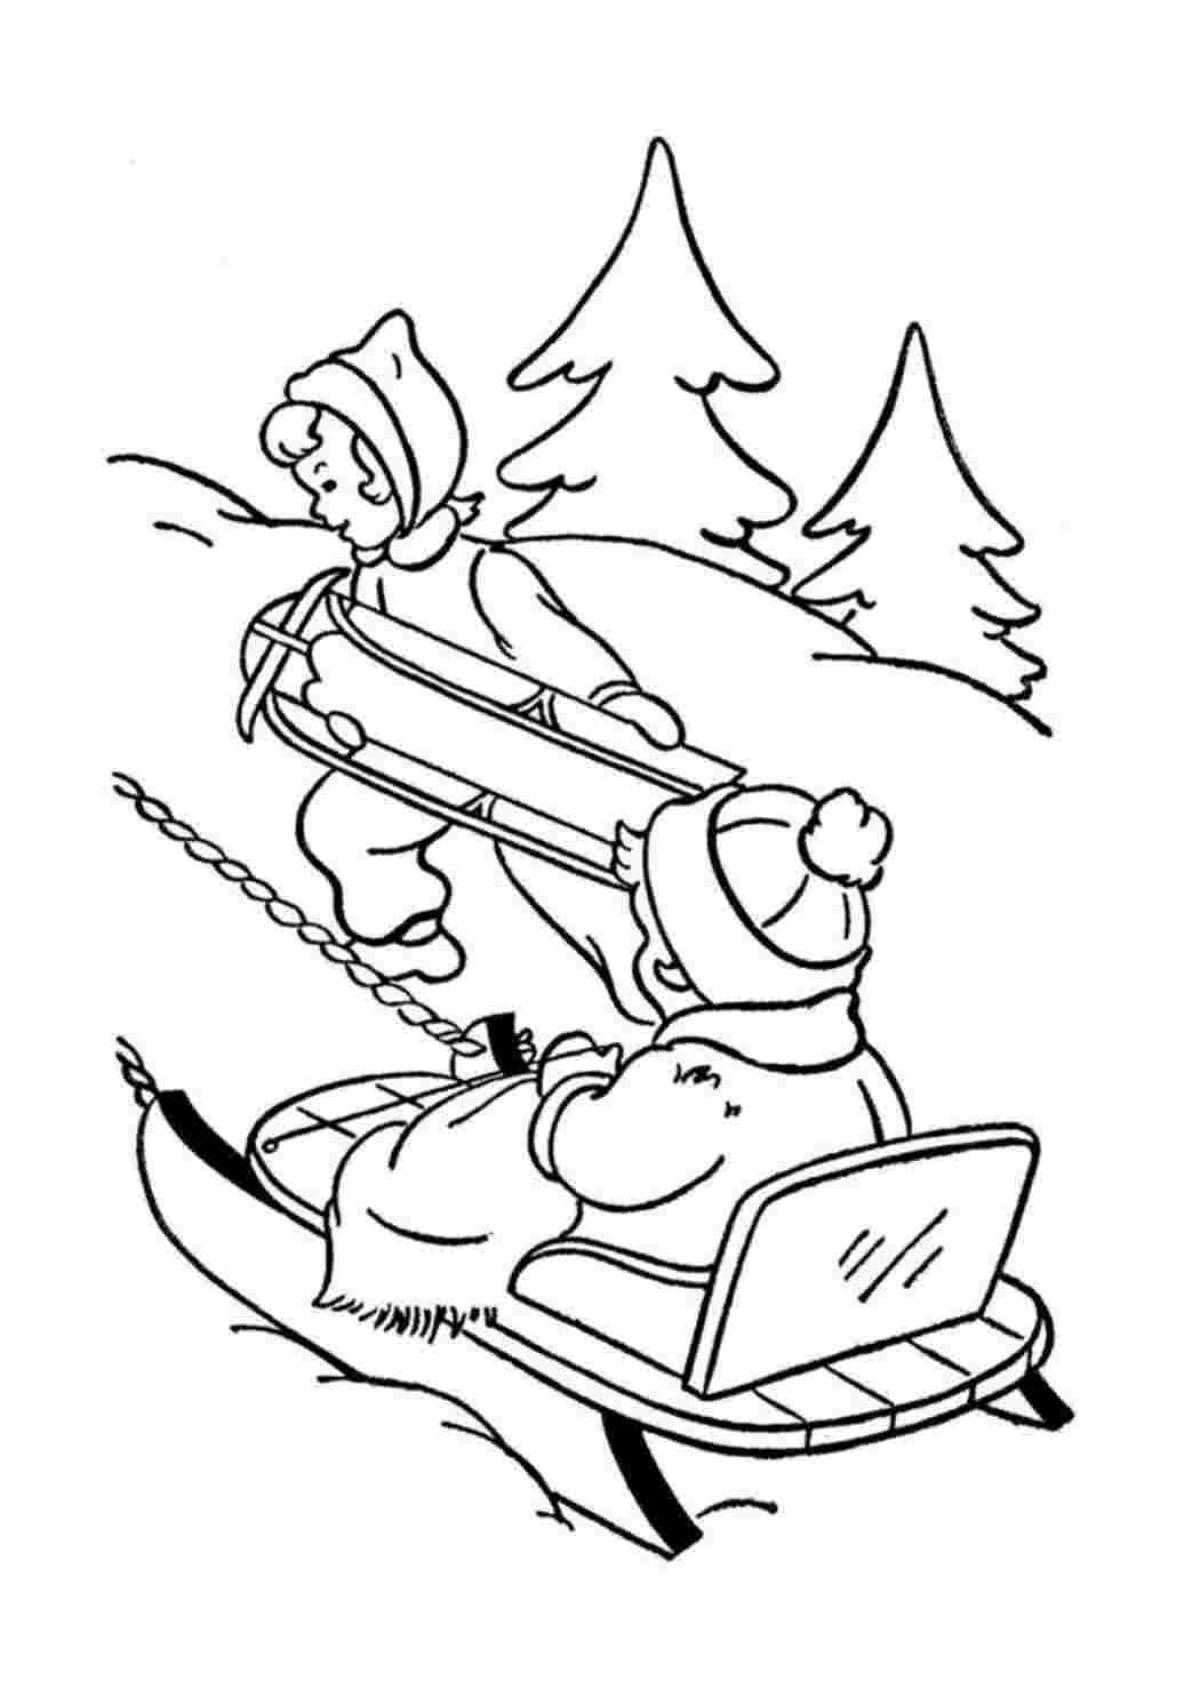 Color-explosion winter safety coloring page